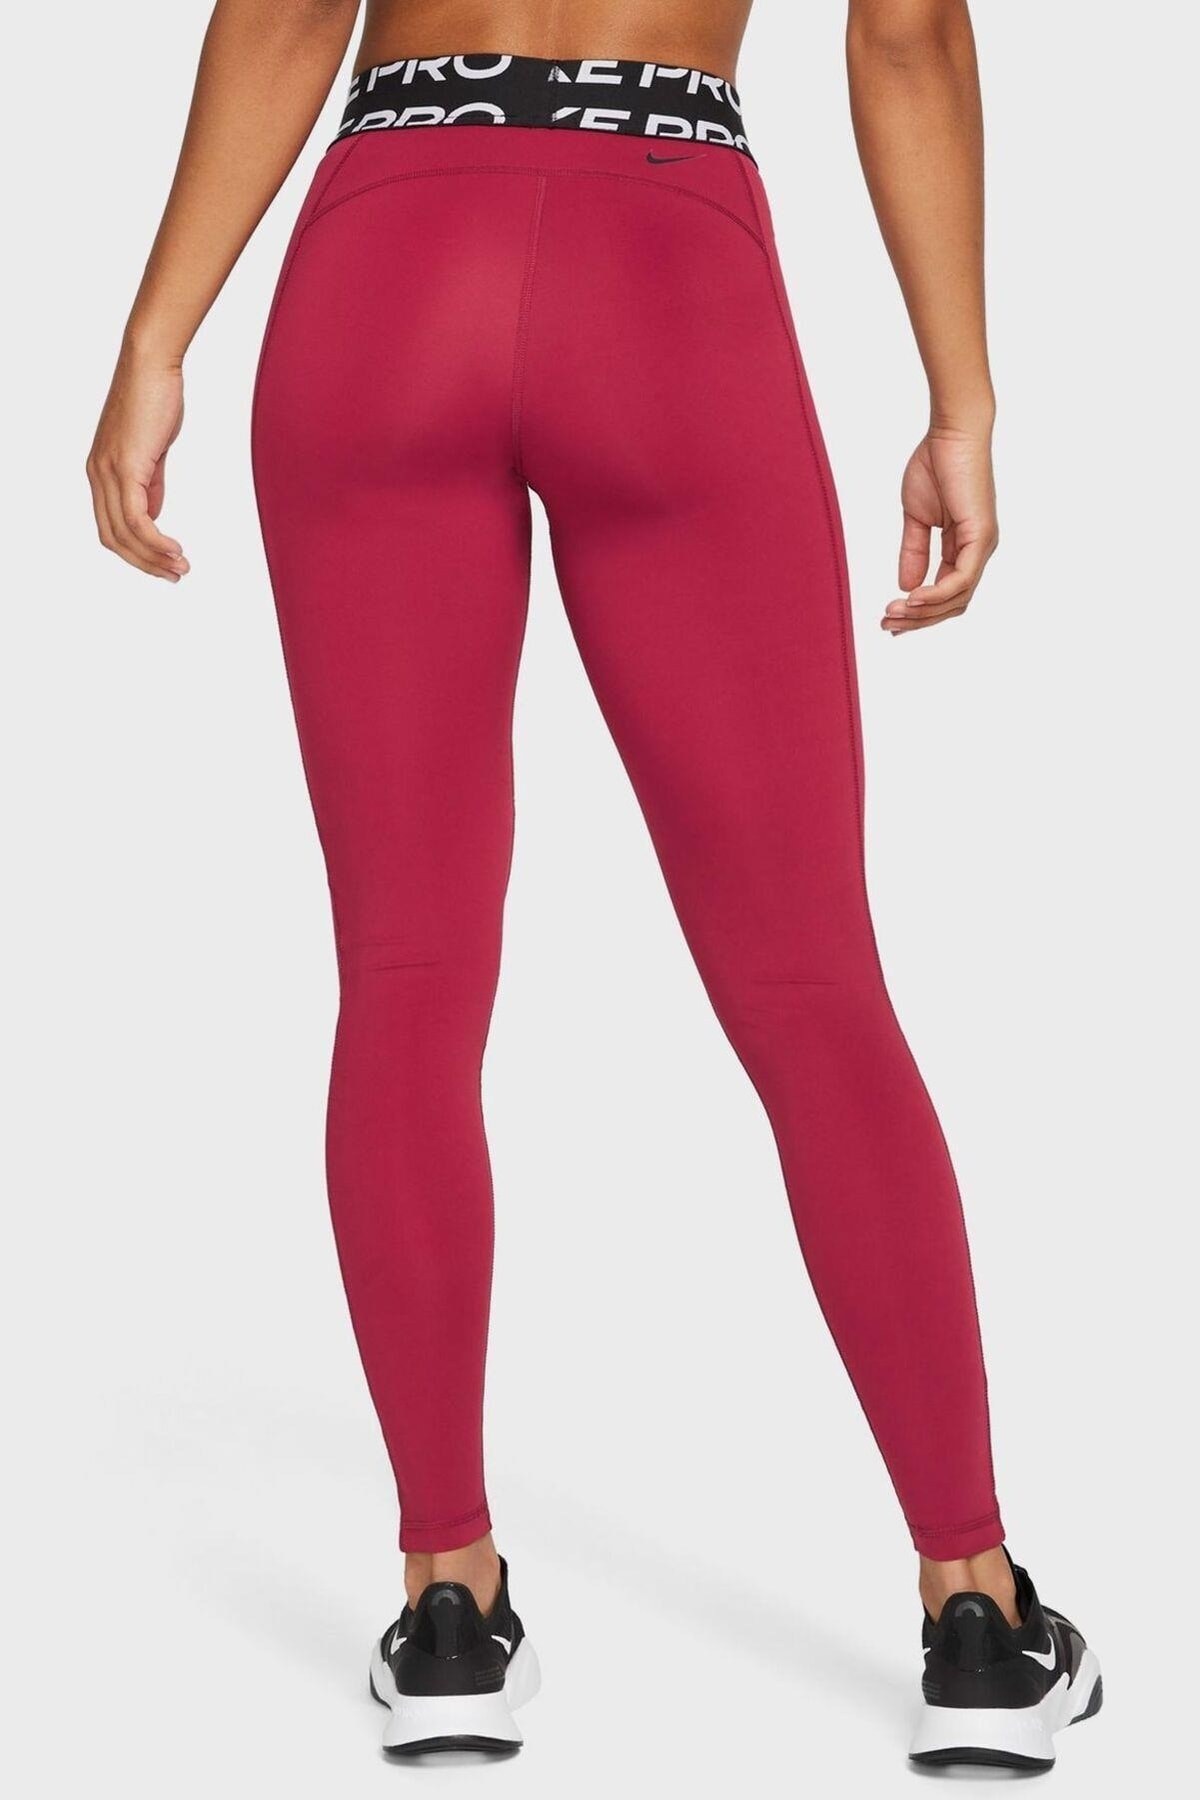 Crossover leggings with pockets - Motus - XPhit